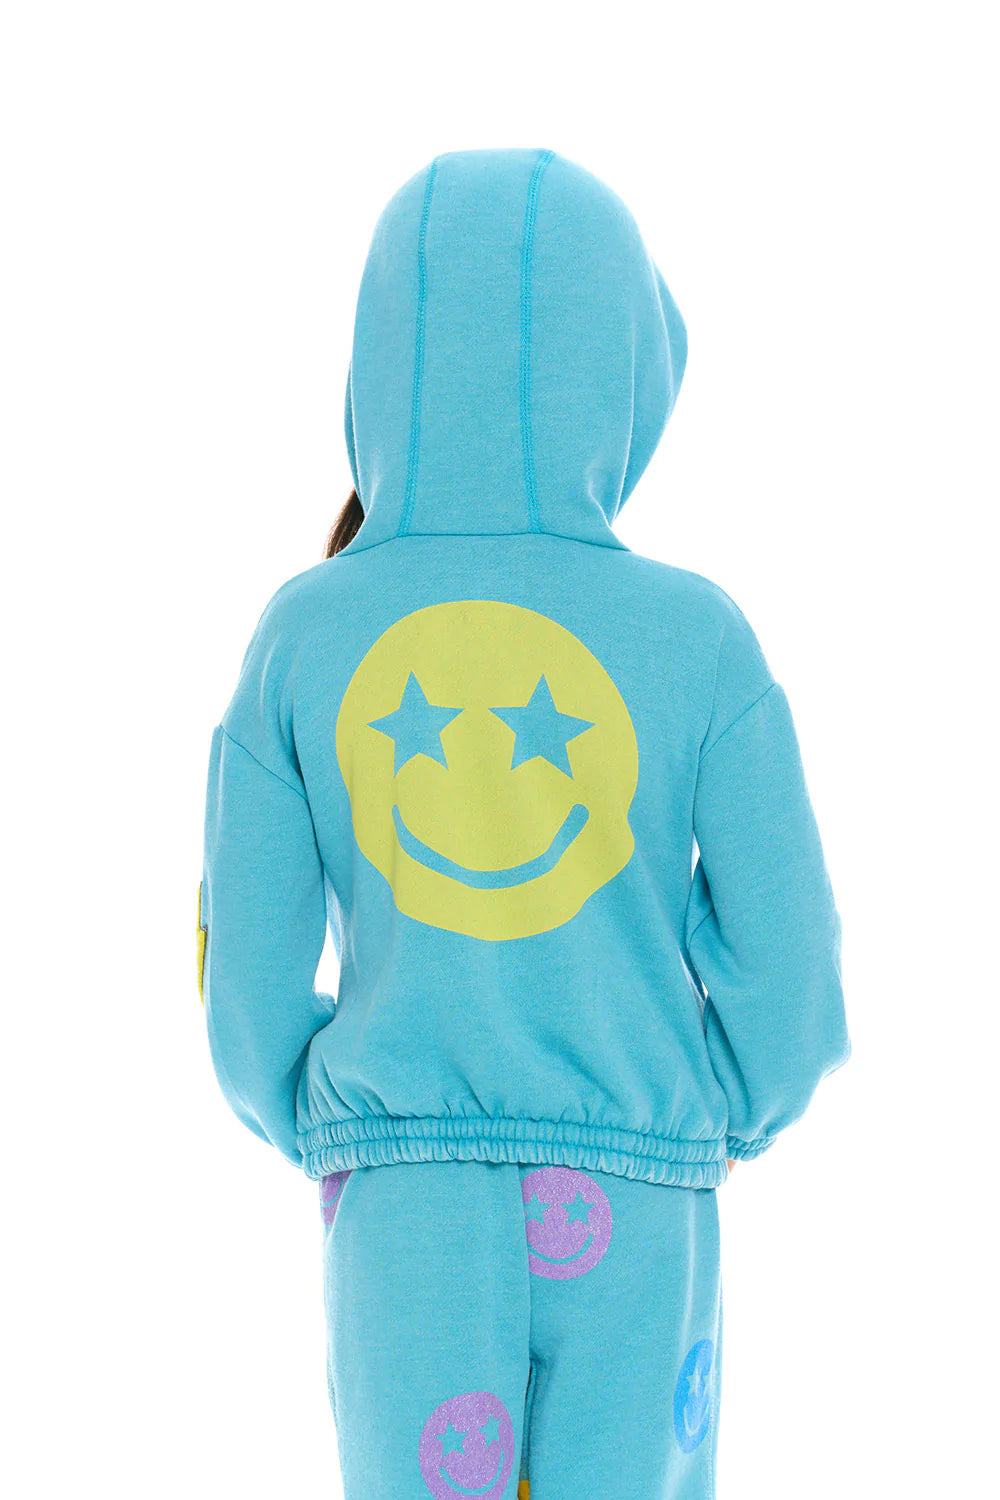 Glitter Smiley Cropped Hoodie  - Doodlebug's Children's Boutique